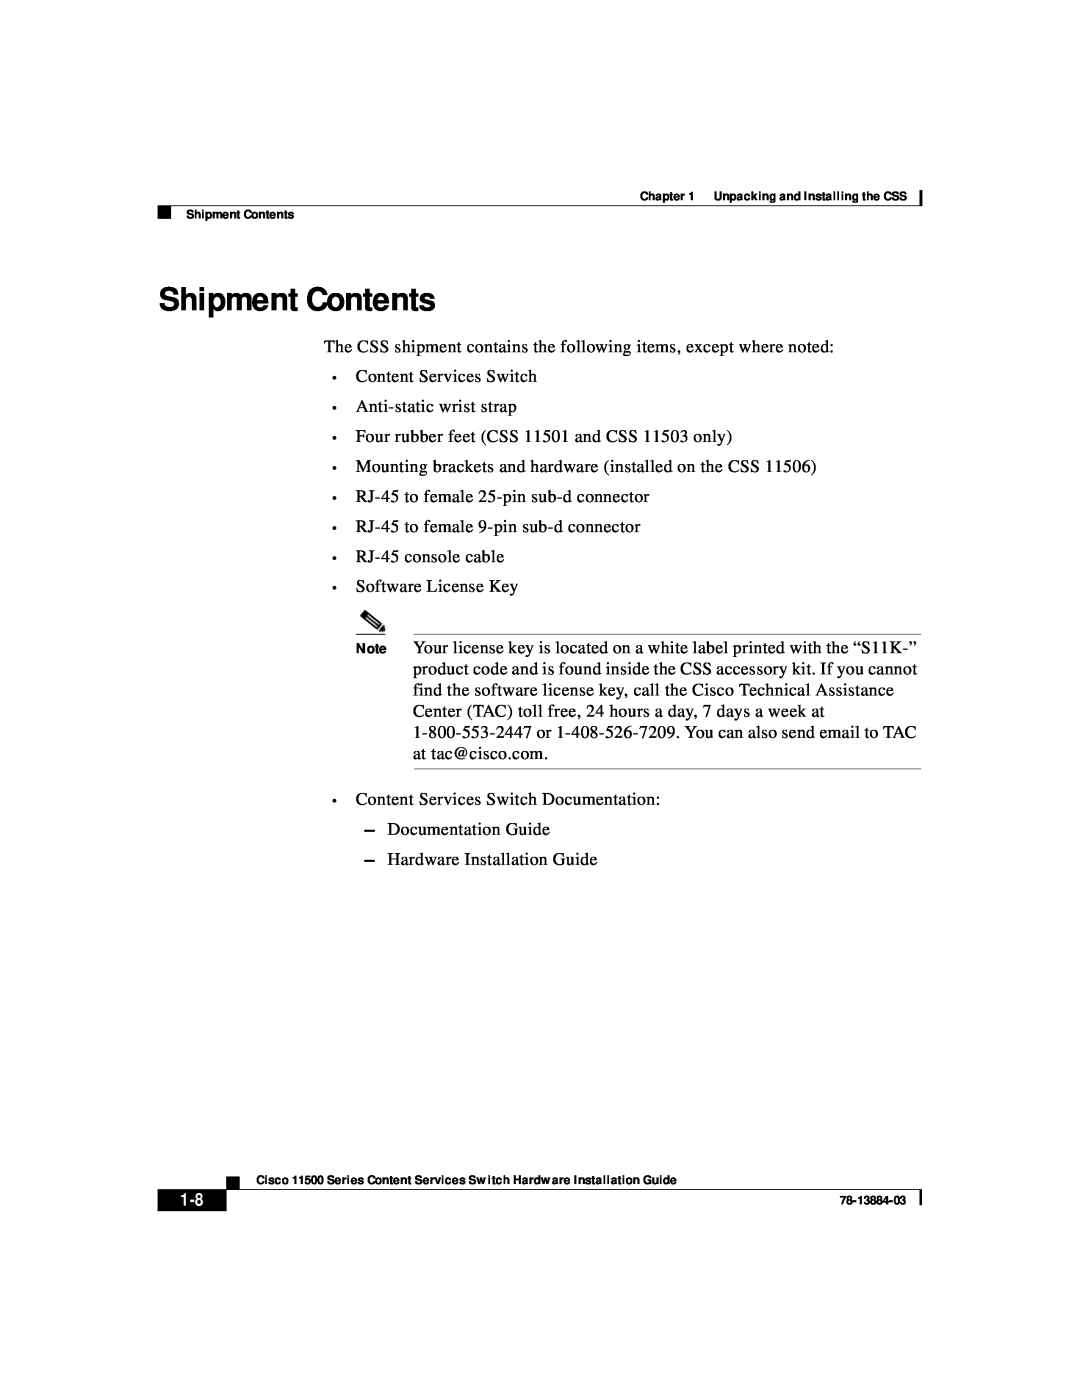 Cisco Systems 11500 Series manual Shipment Contents 